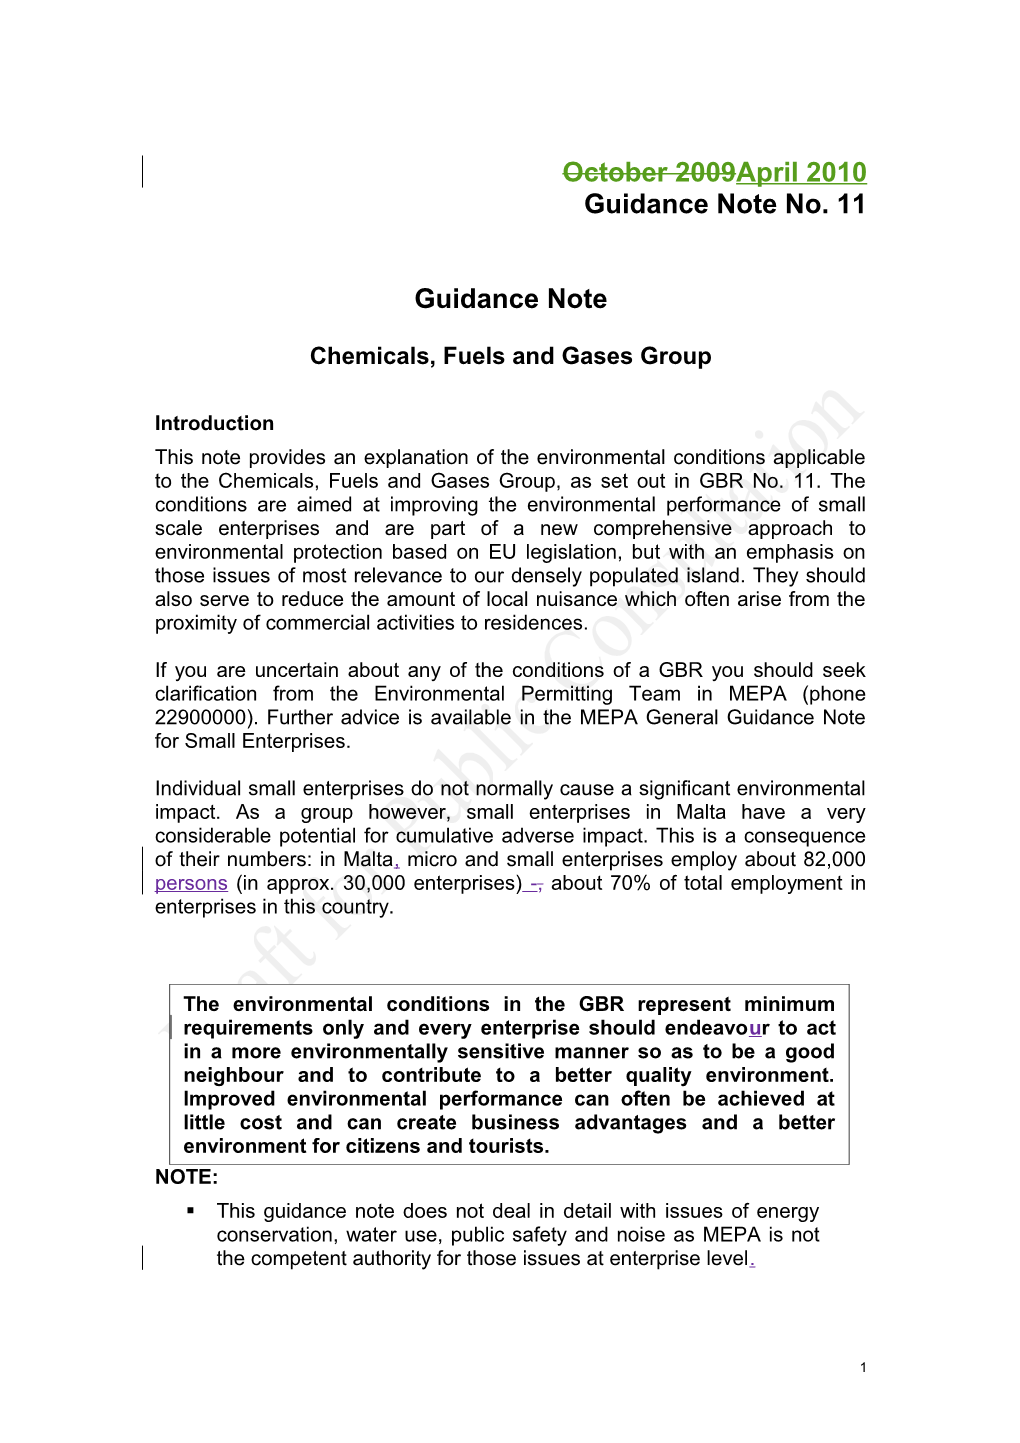 Guidance Note Chemicals